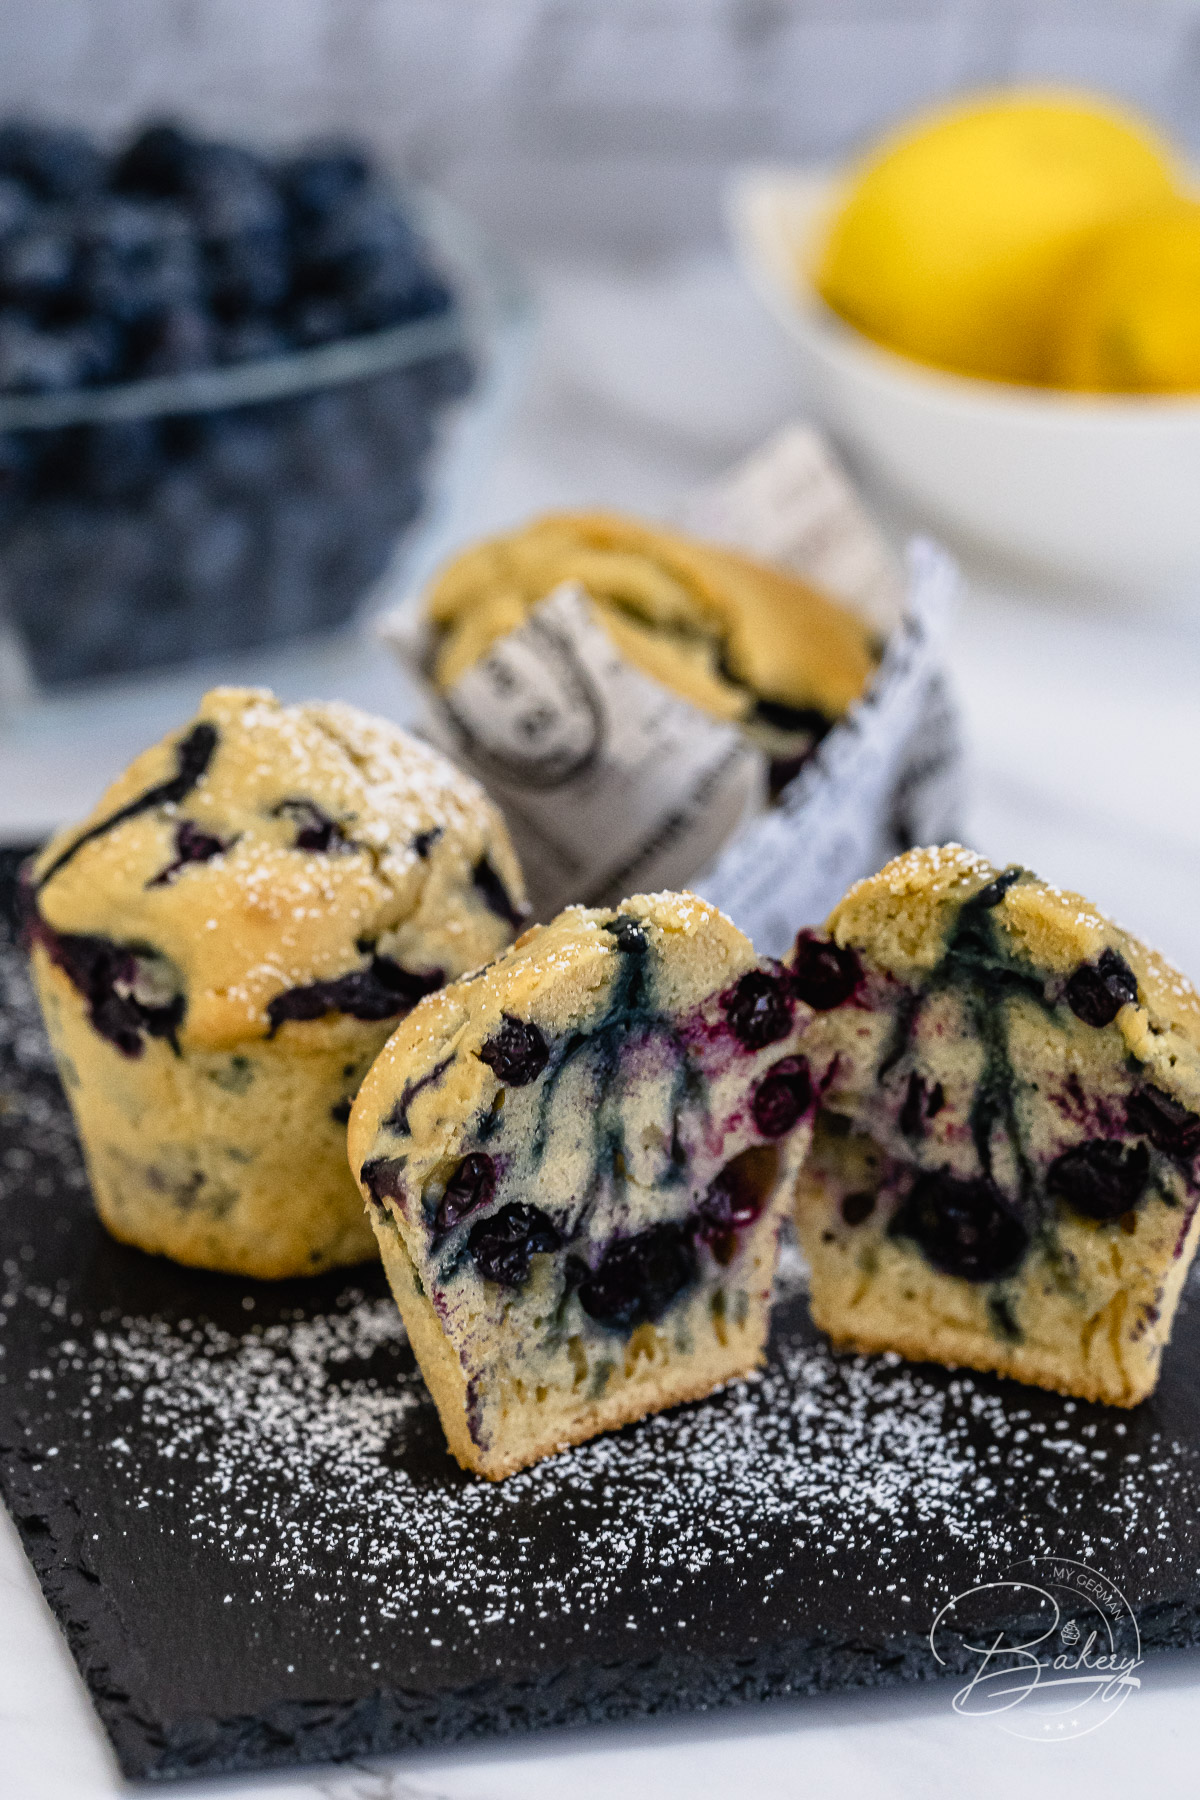 Blueberry Muffins Recipe - Best Muffin Recipe as a Base - Bake moist, fluffy, delicious muffins with blueberries. Quick, easy and delicious, these blueberry muffins are very similar to the example at Starbucks. Buttermilk, cane sugar and flour